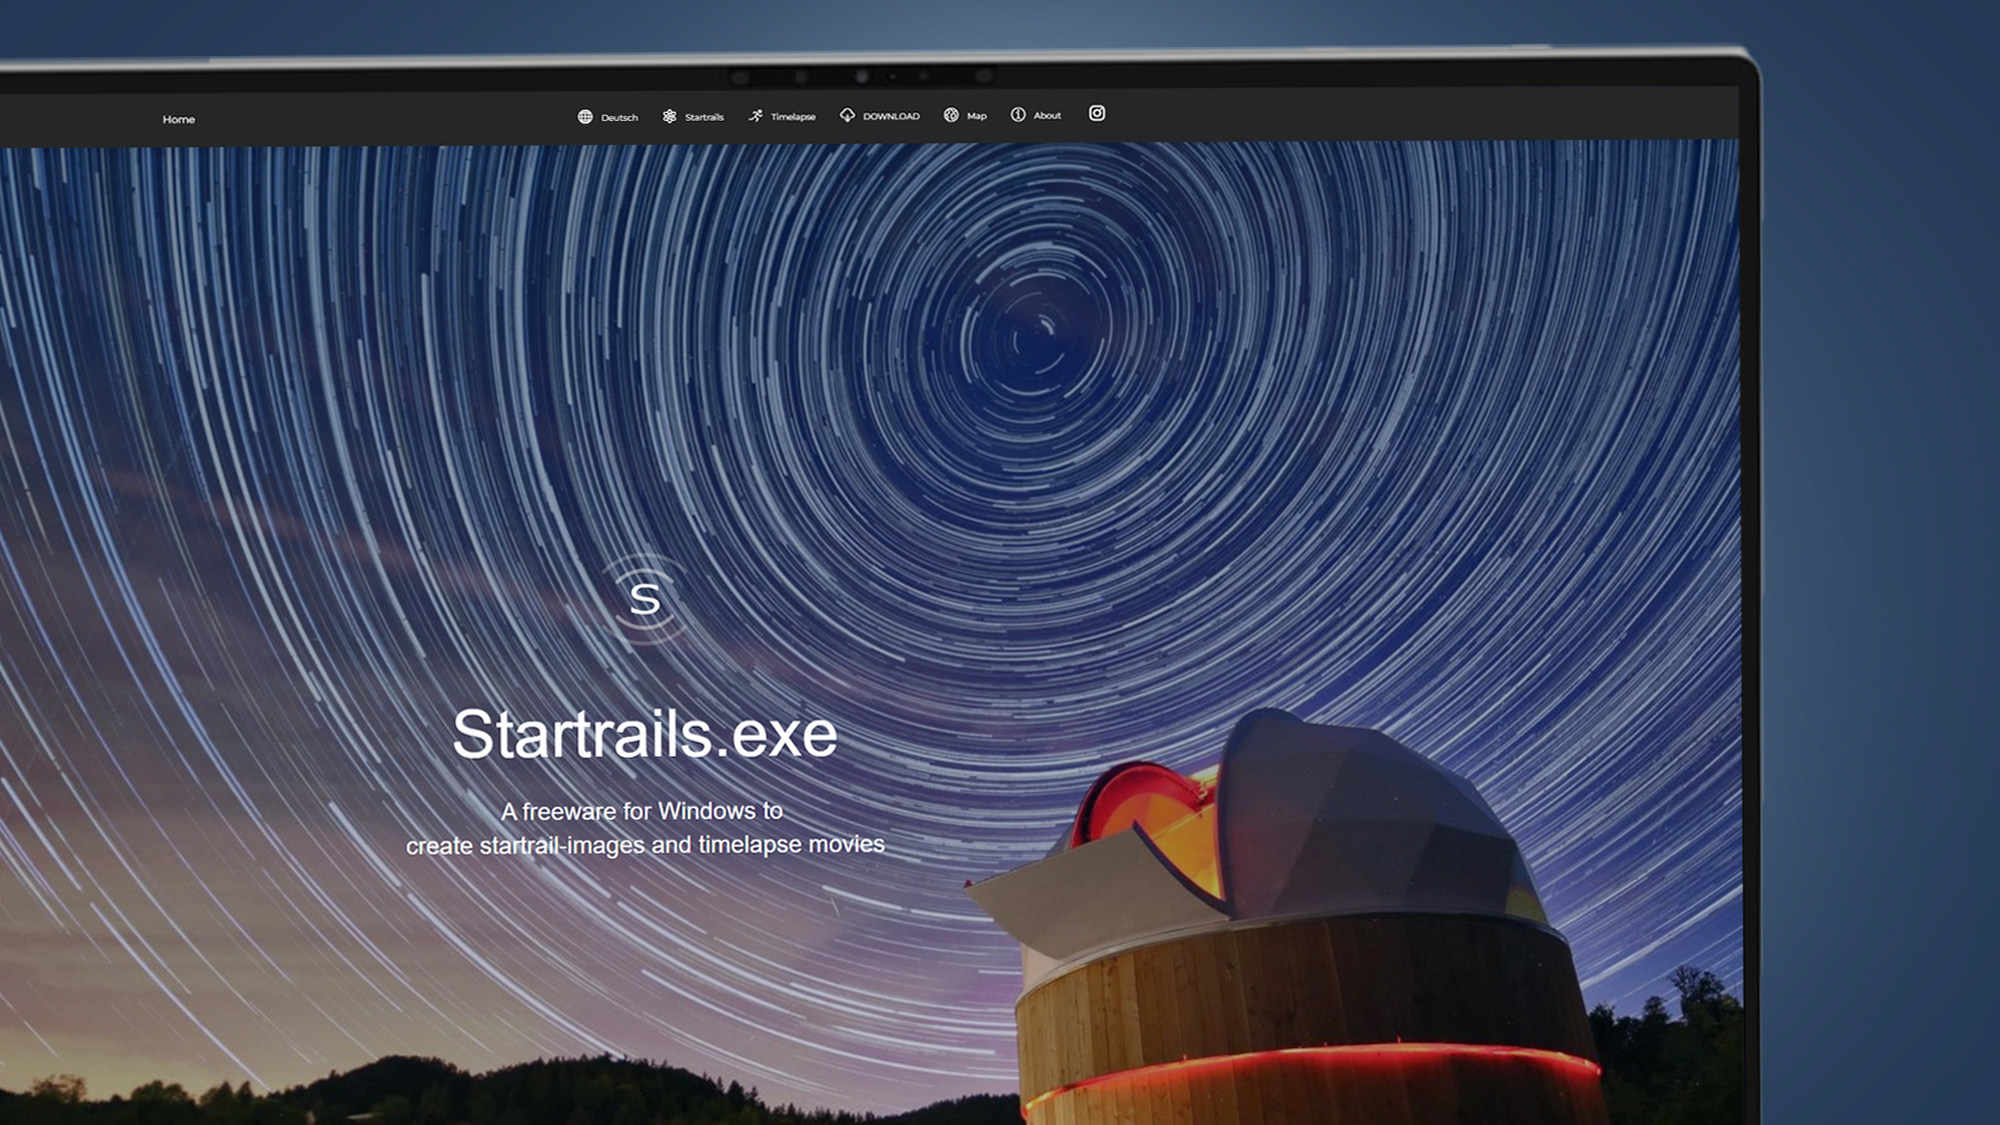 A laptop screen showing the Startrails software homepage